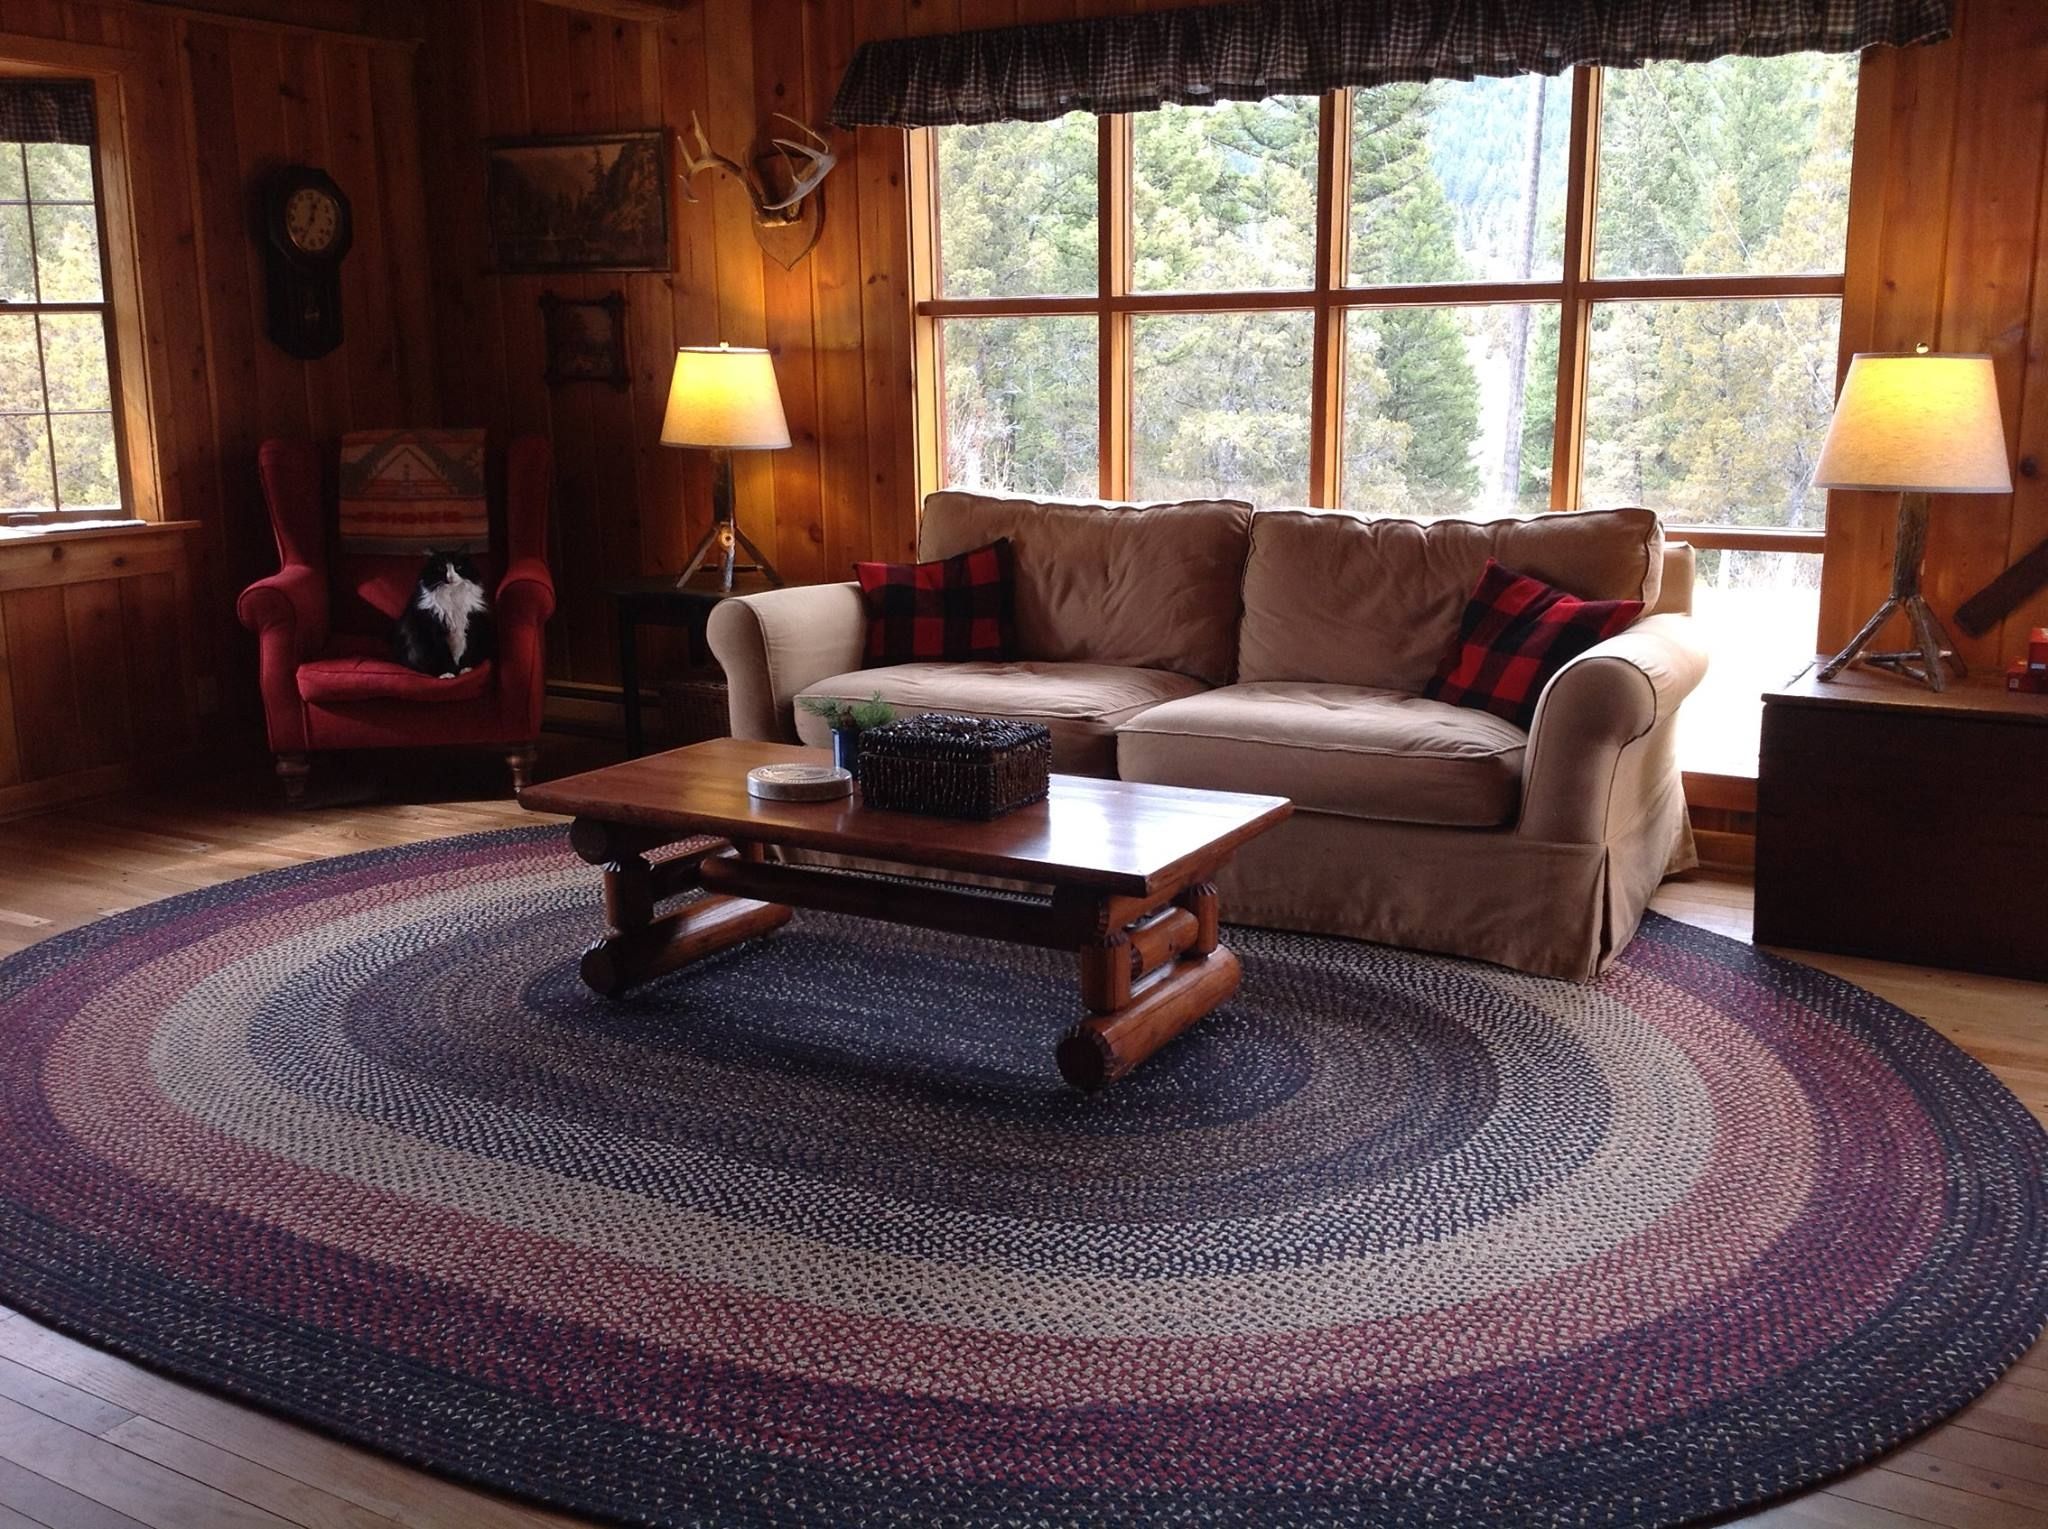 Large Oval Rug Roselawnlutheran Inside Wool Braided Area Rugs (View 11 of 11)